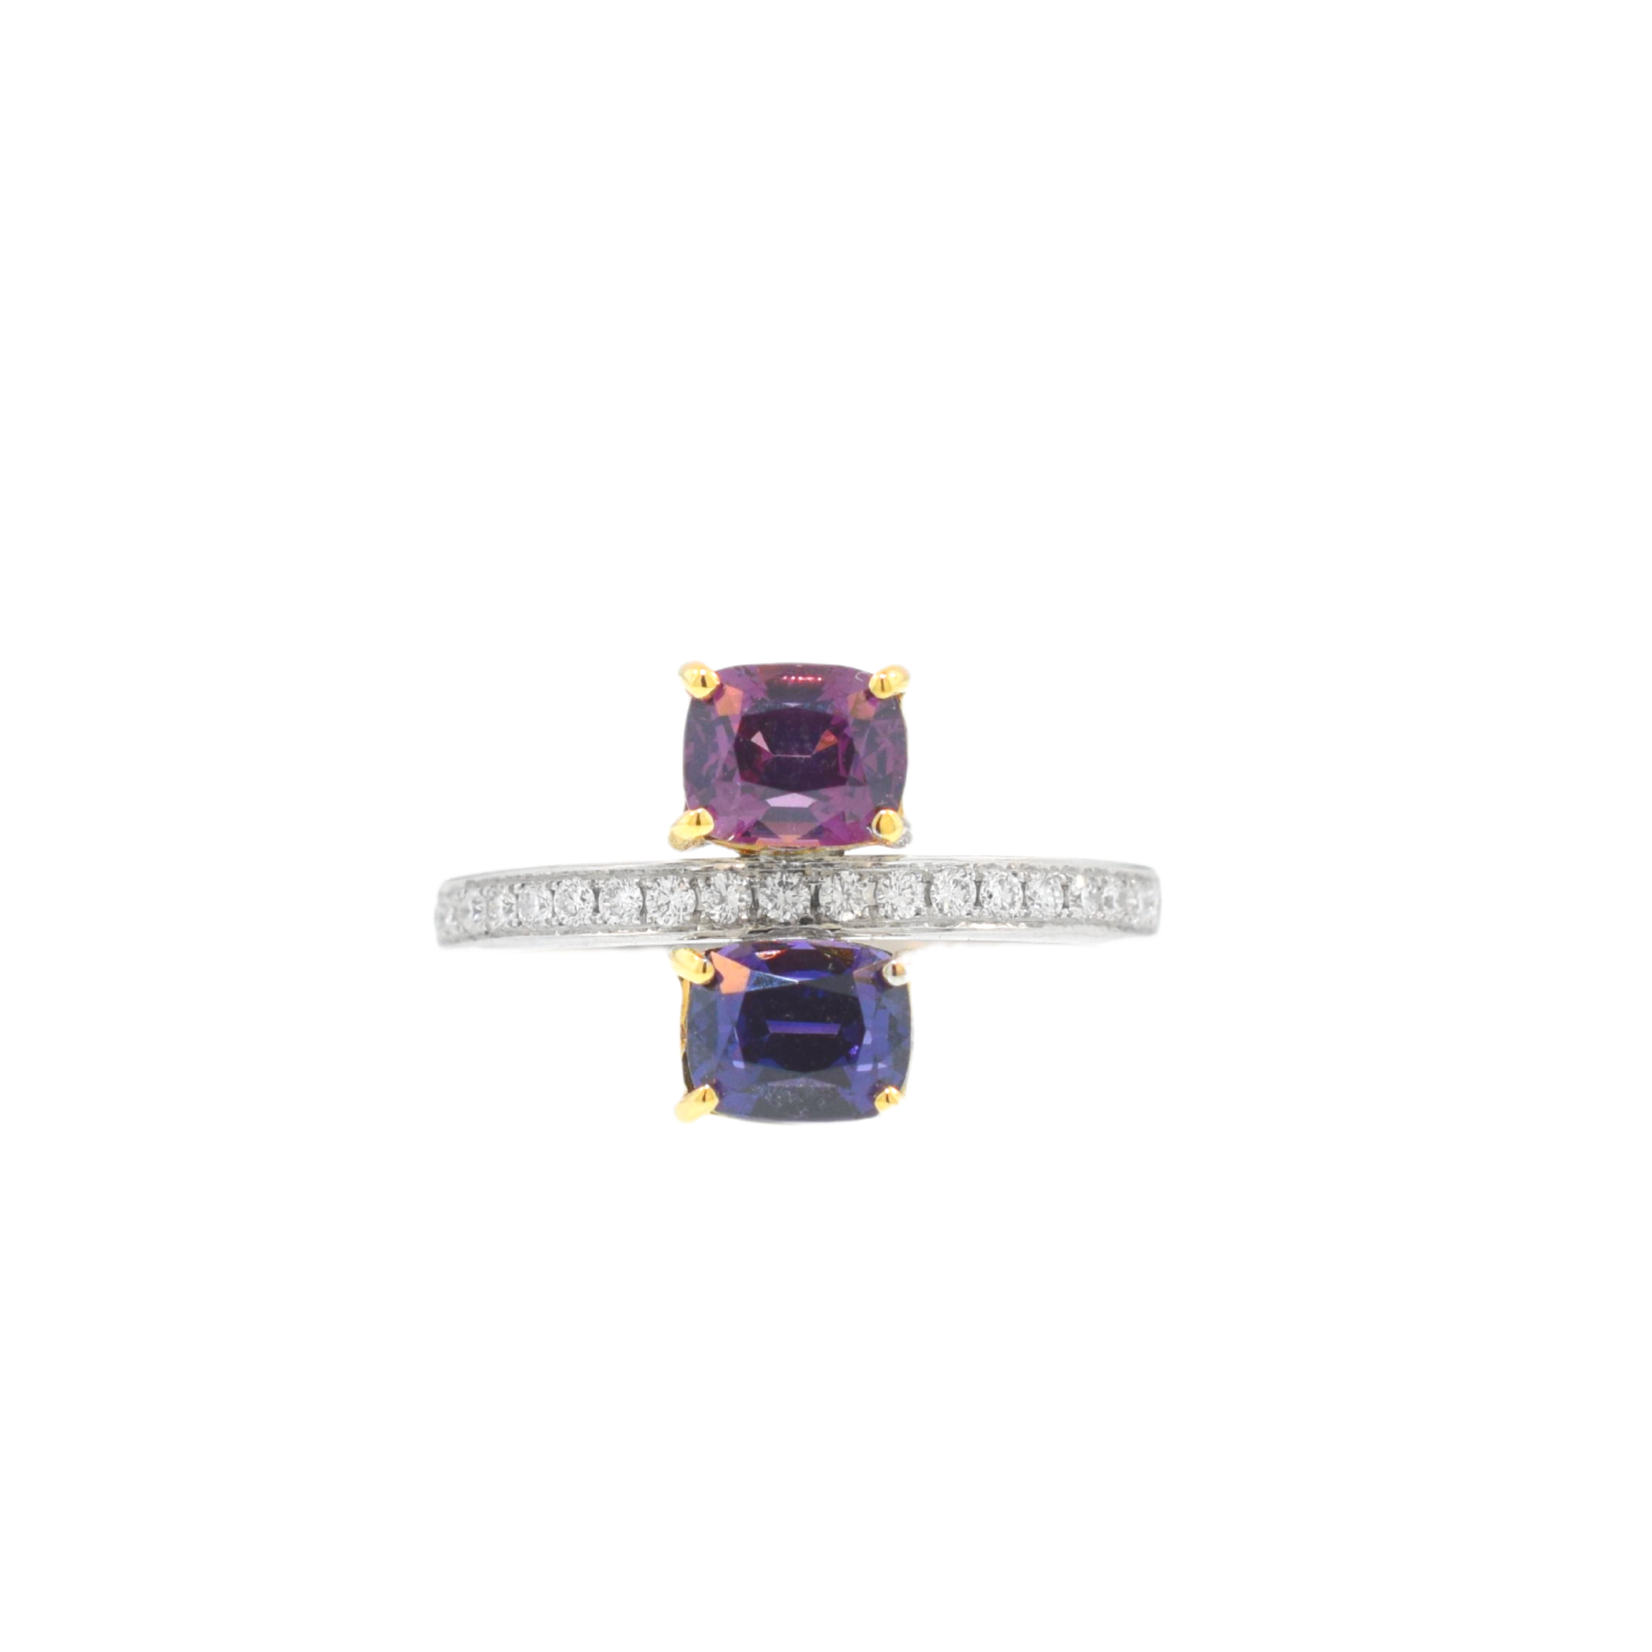 Double Spinel Ring